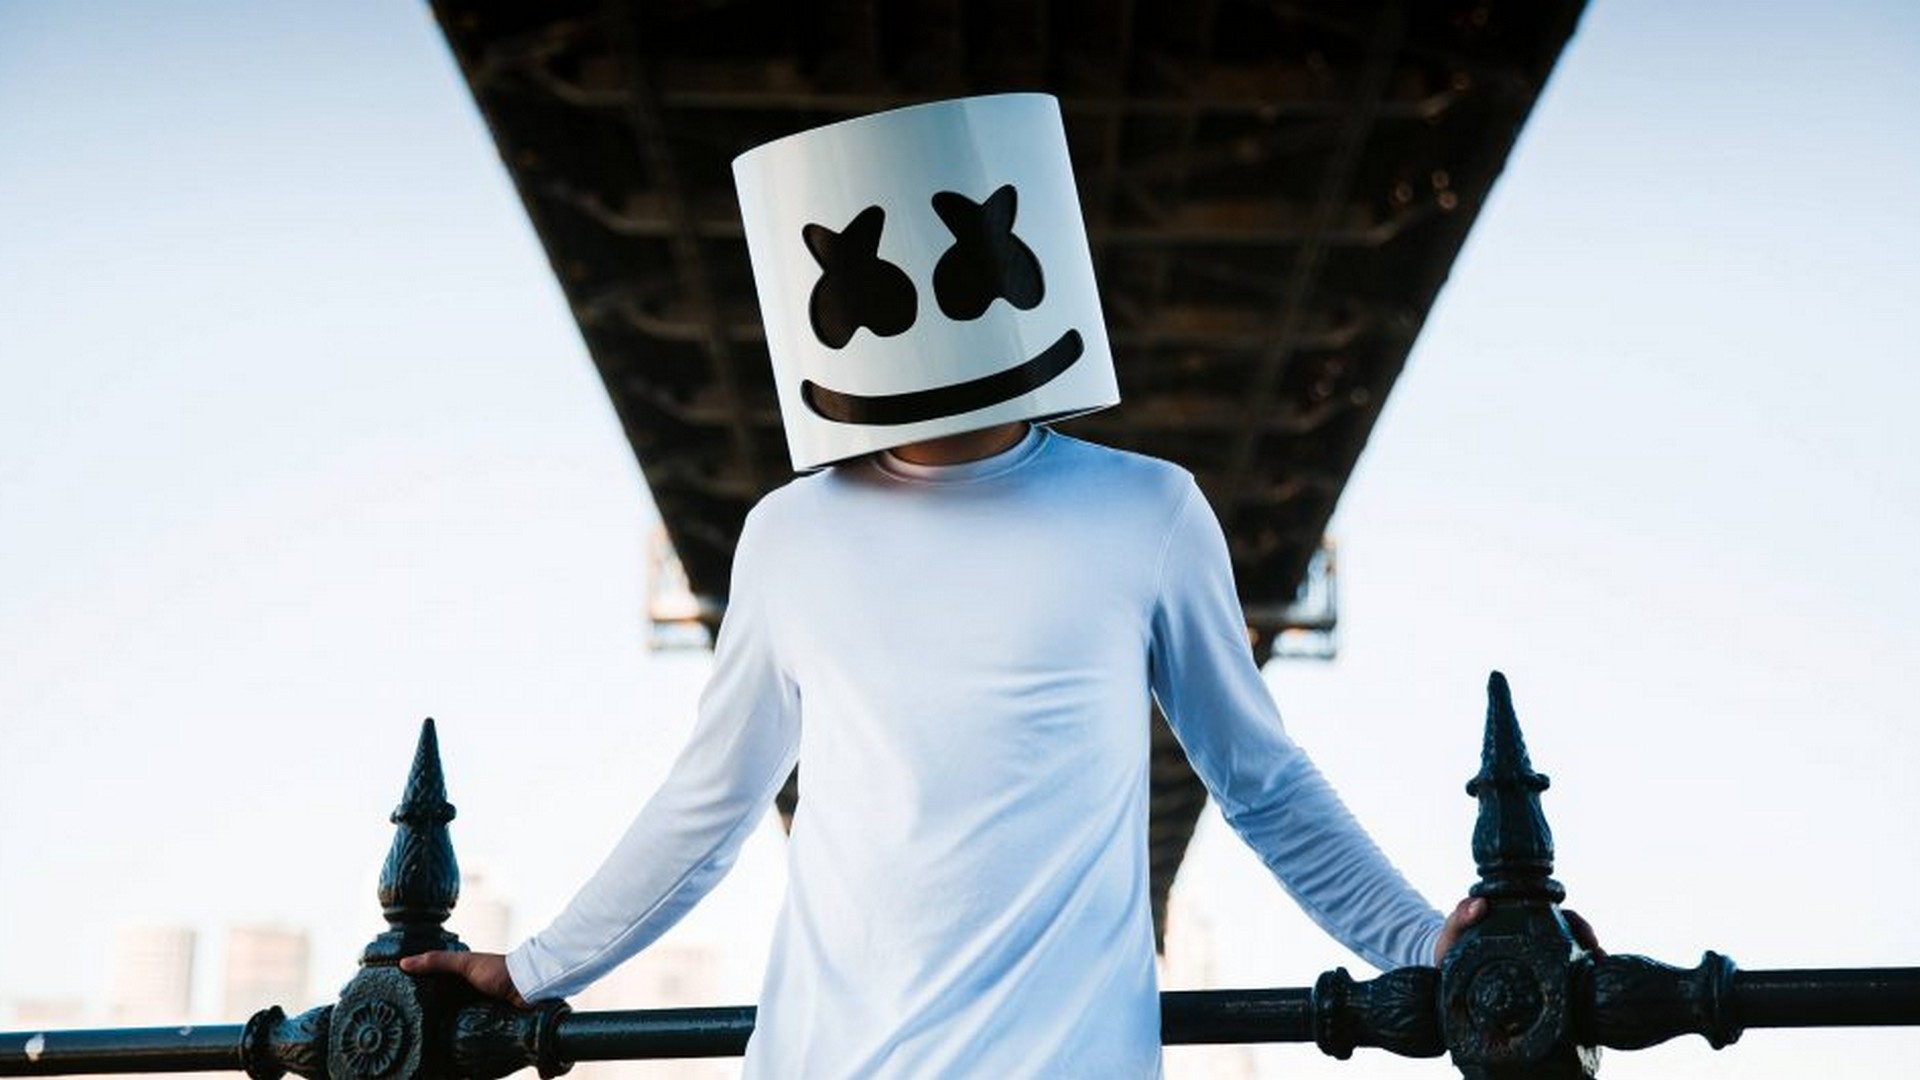 Wallpaper HD Marshmello With high-resolution 1920X1080 pixel. You can use this wallpaper for your Desktop Computer Backgrounds, Mac Wallpapers, Android Lock screen or iPhone Screensavers and another smartphone device